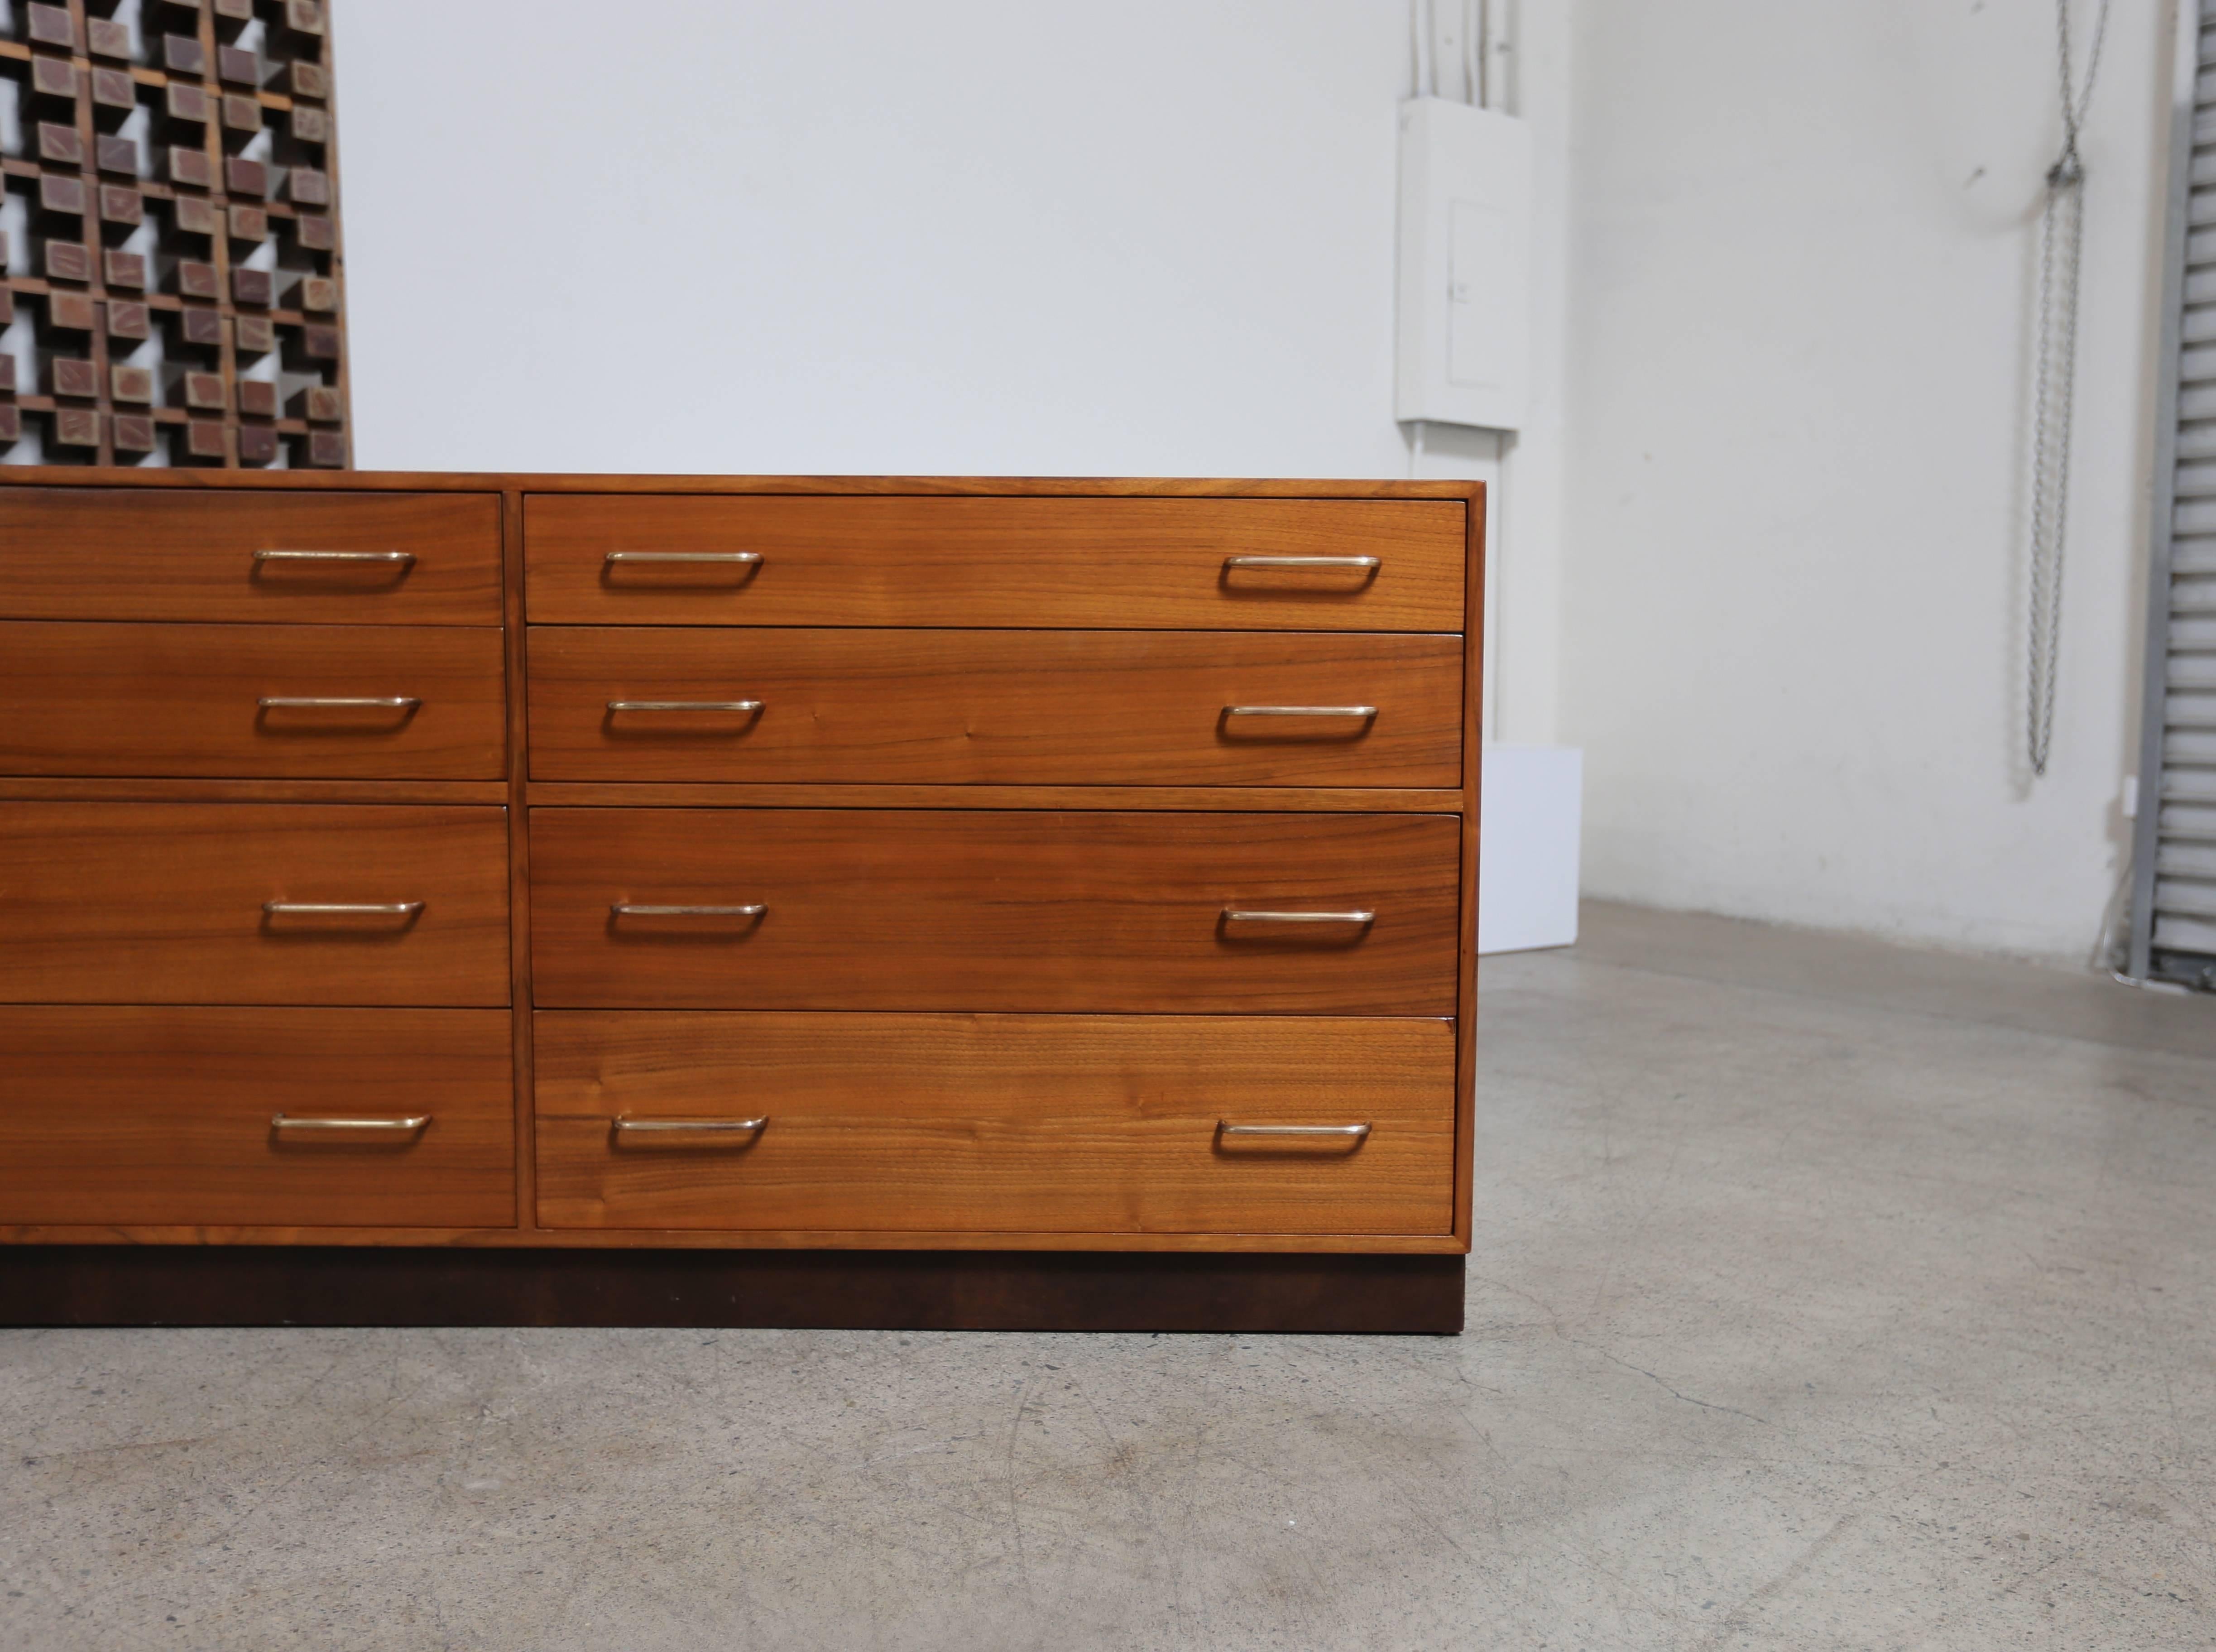 Walnut dresser by Edward Wormley for Dunbar. The base is wrapped in leather. Nice walnut grain throughout.

MOVING SALE!!!